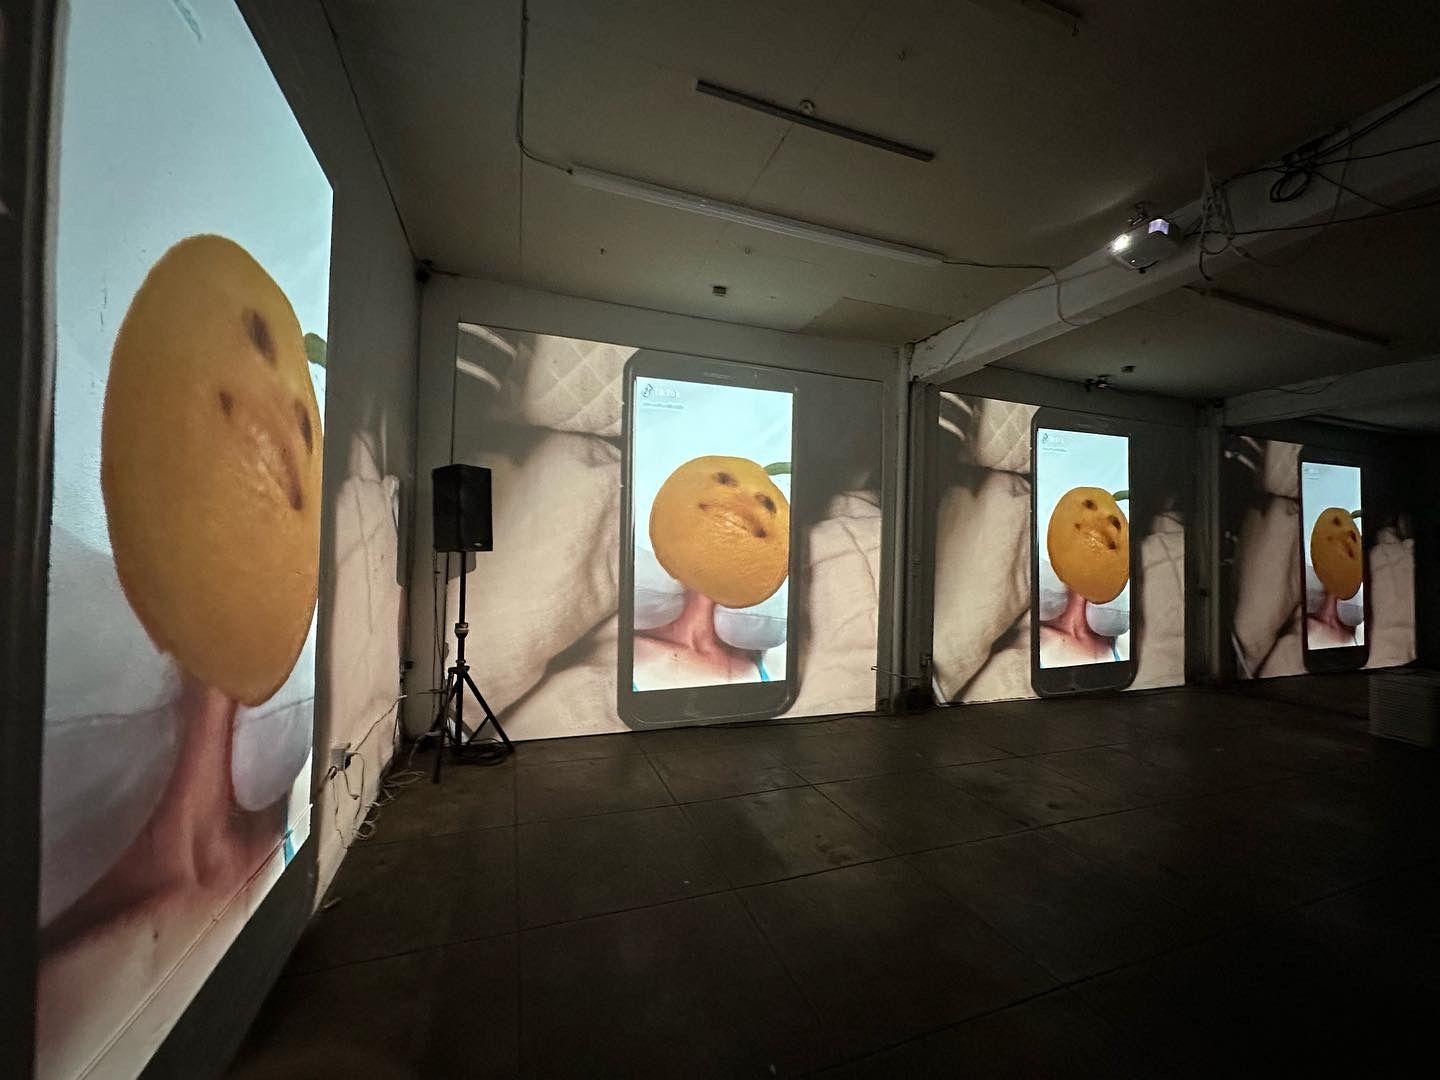 a lemon with a face on an iphone repeated across four immersive projections